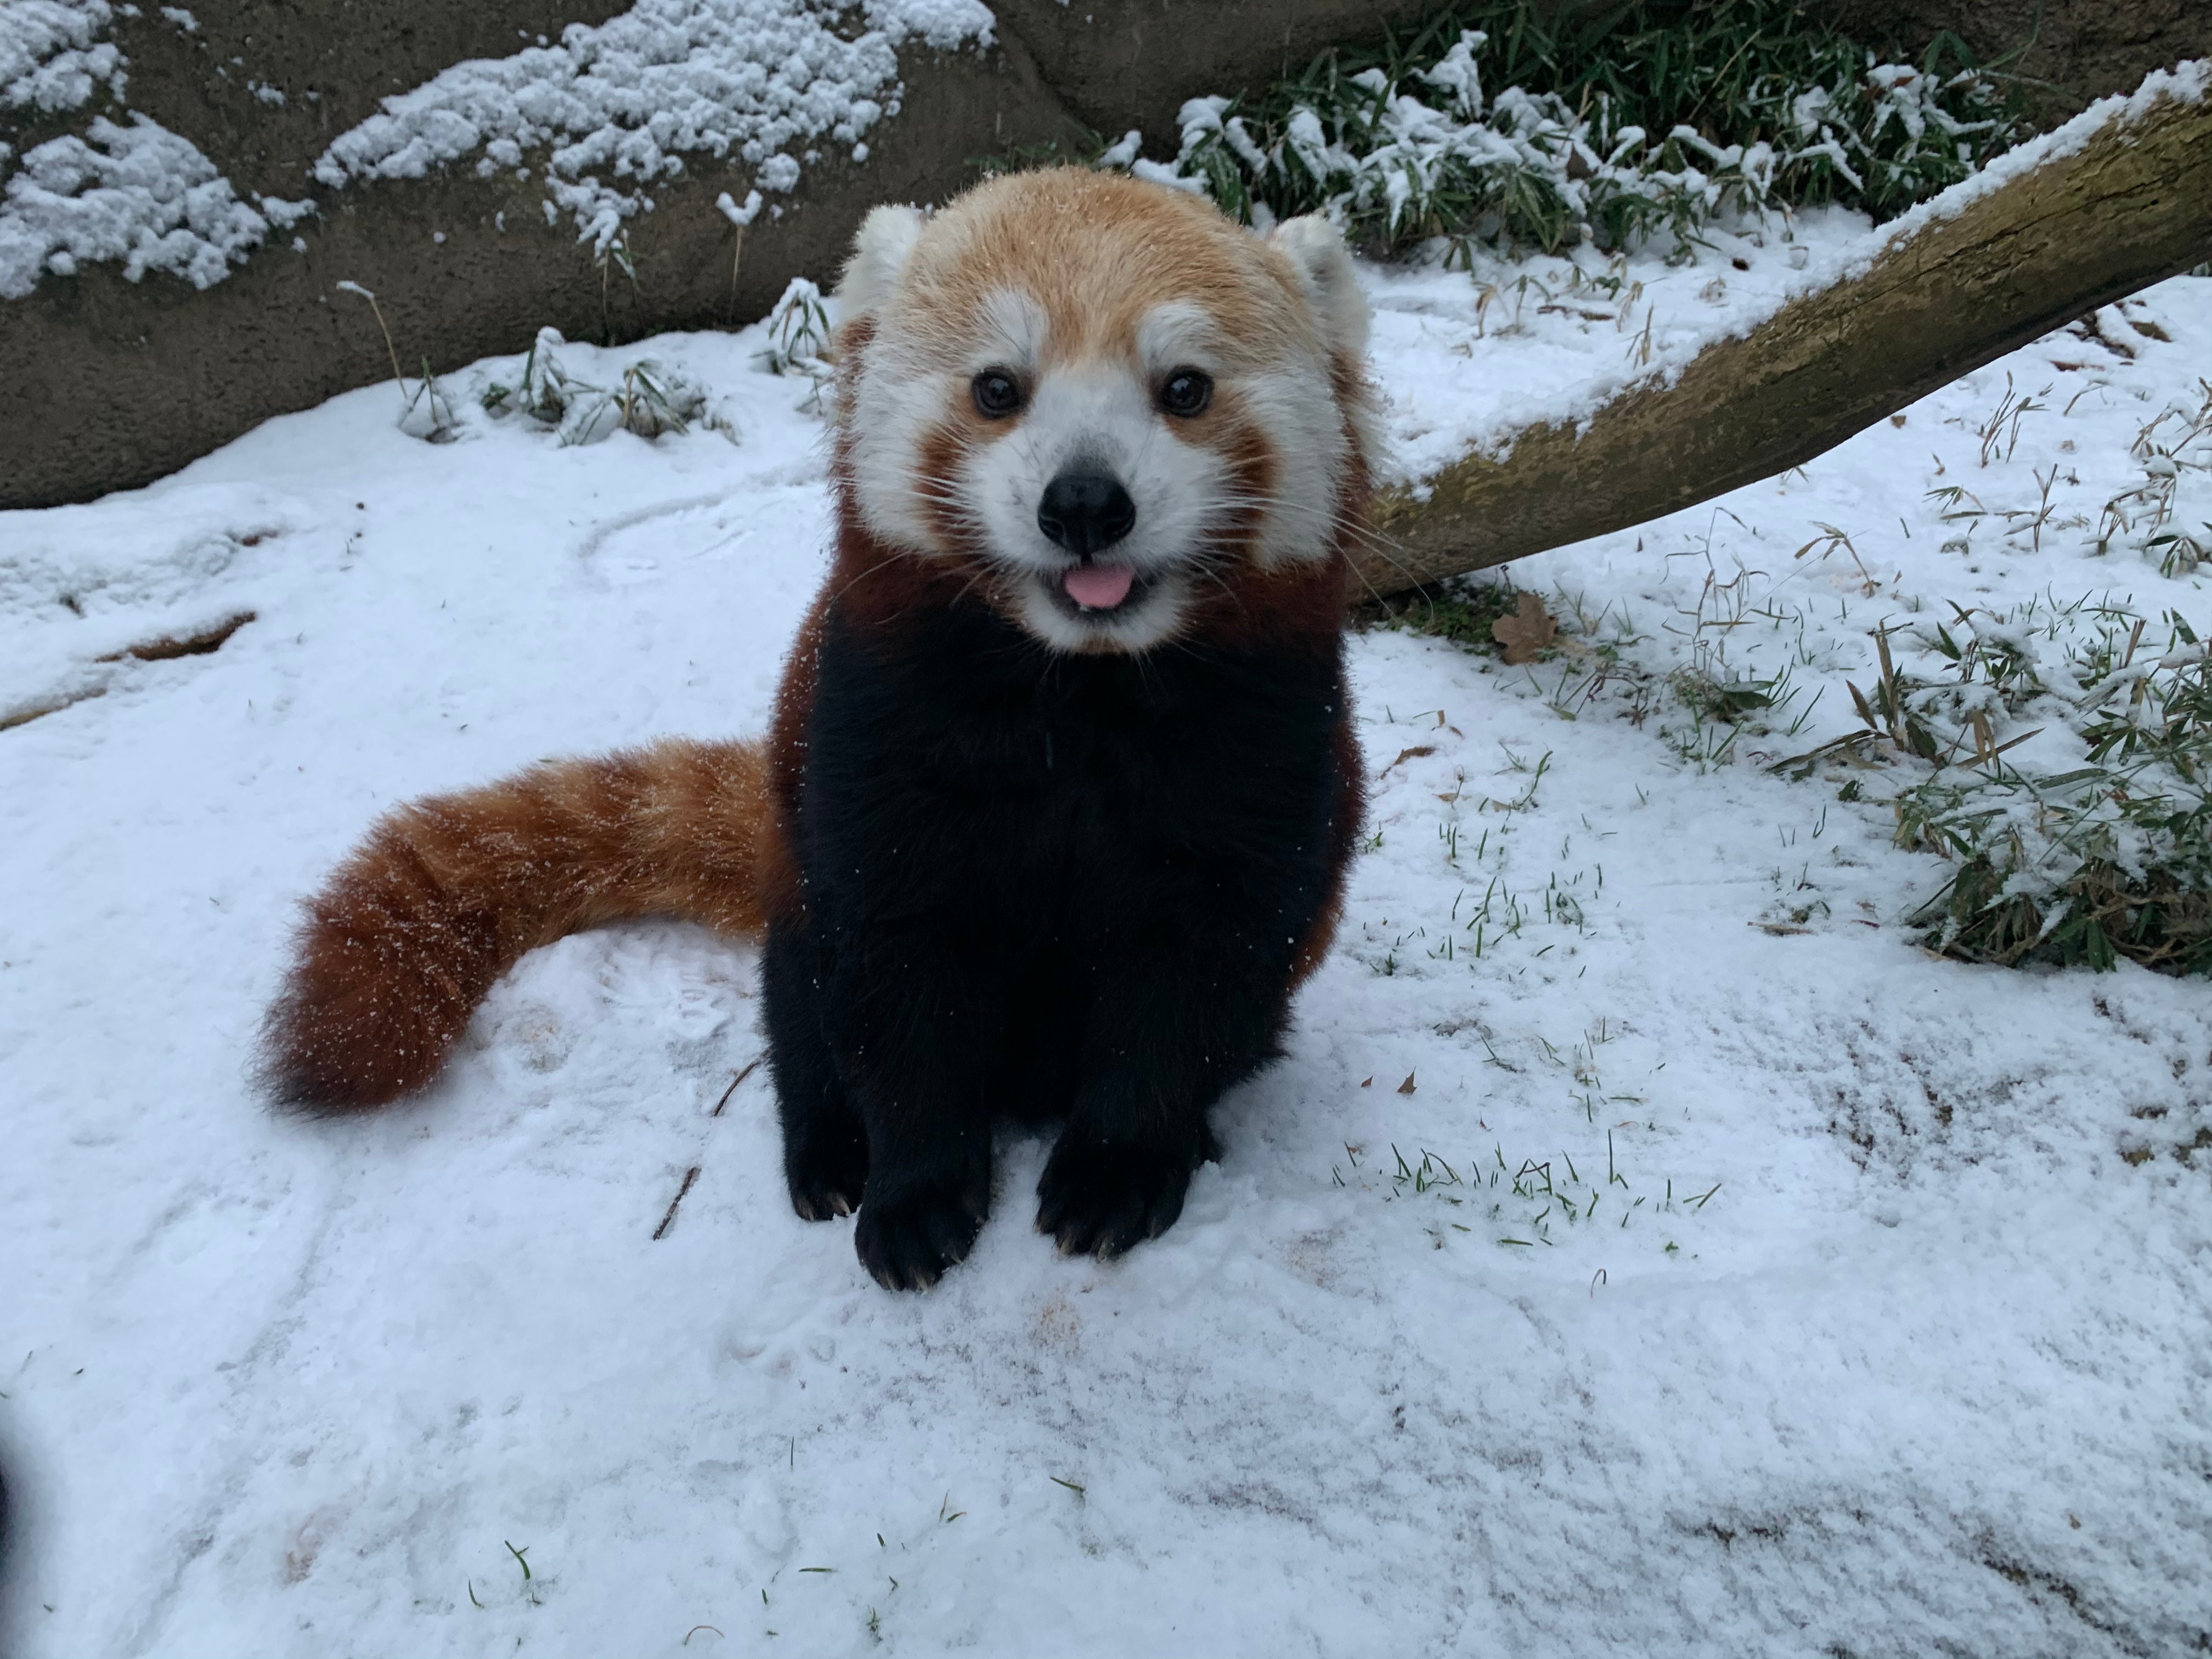 A red panda stands in a snowy outdoor yard